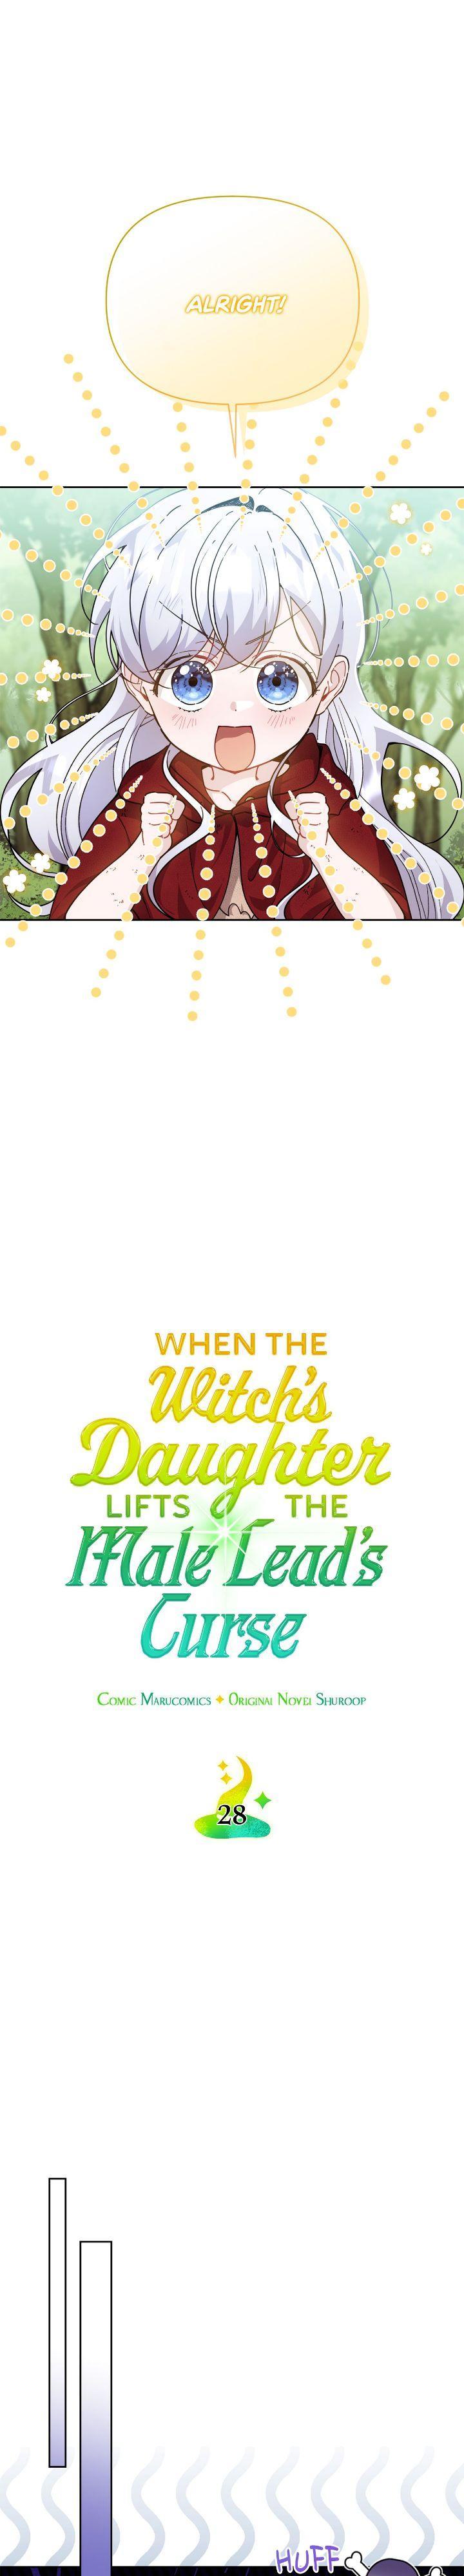 When the Witch’s Daughter Lifts the Male Lead’s Curse chapter 28